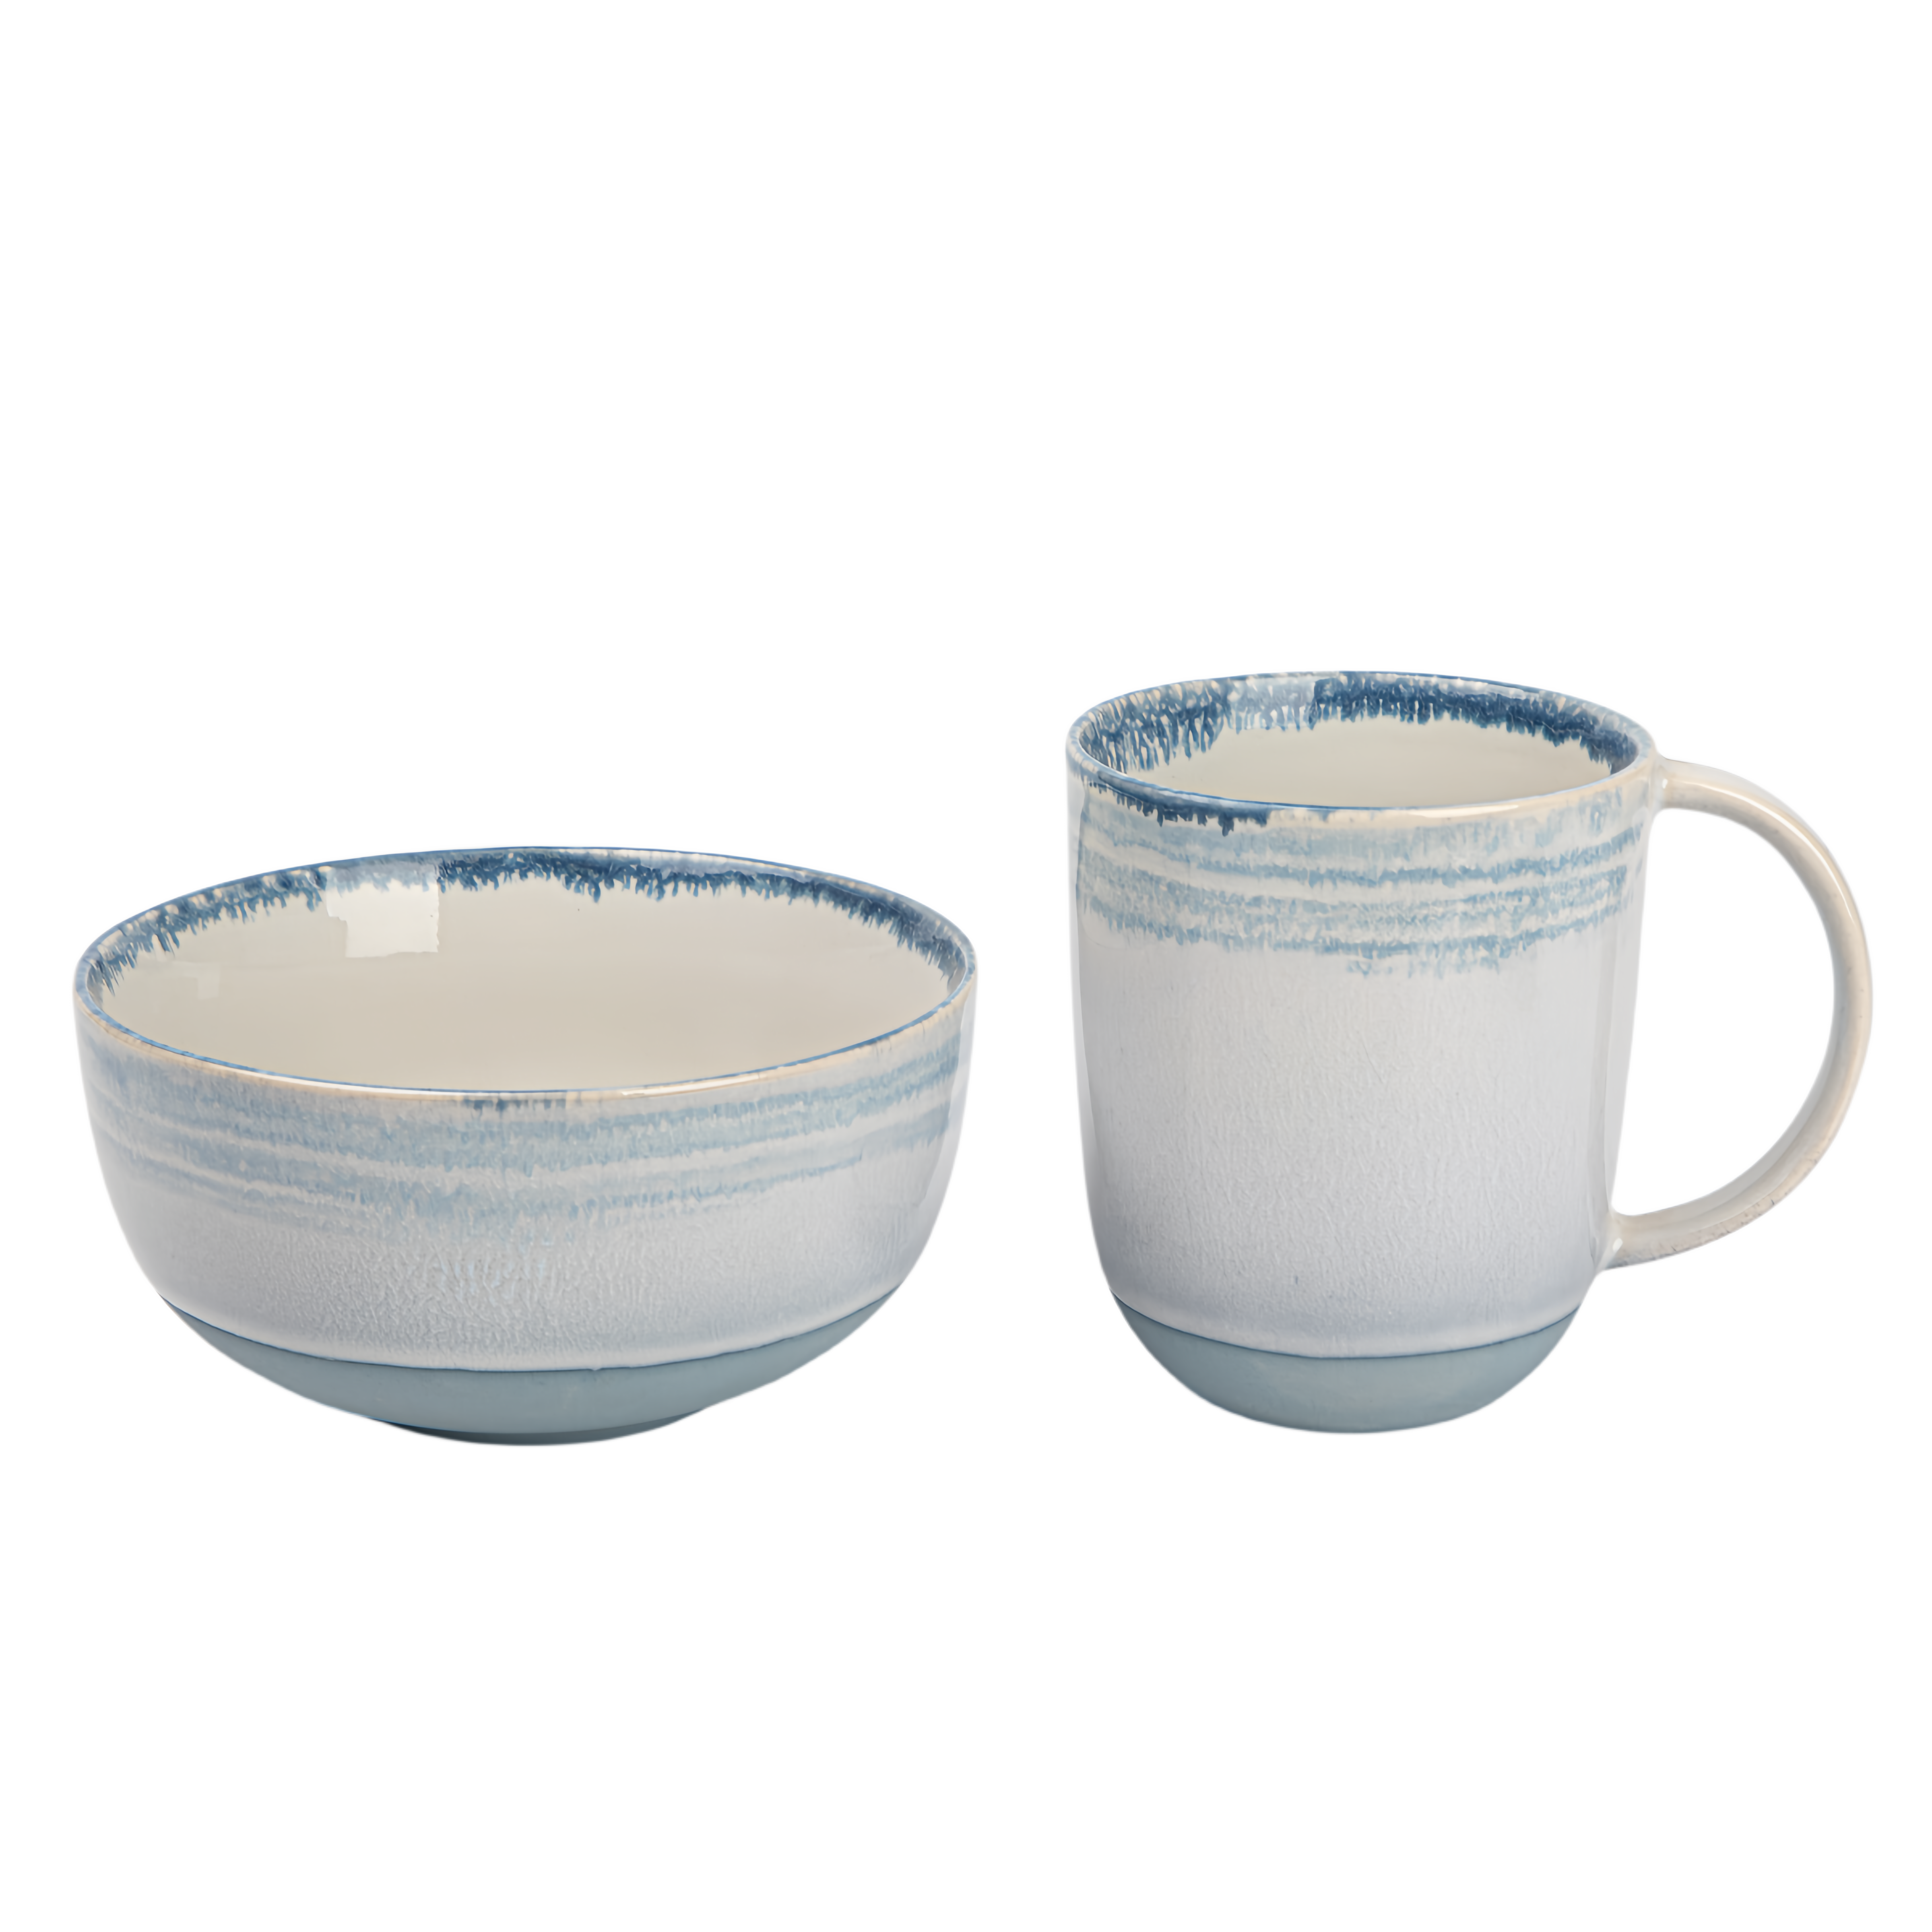 qinge Blue and White Ceramic Cup and Bowl Set